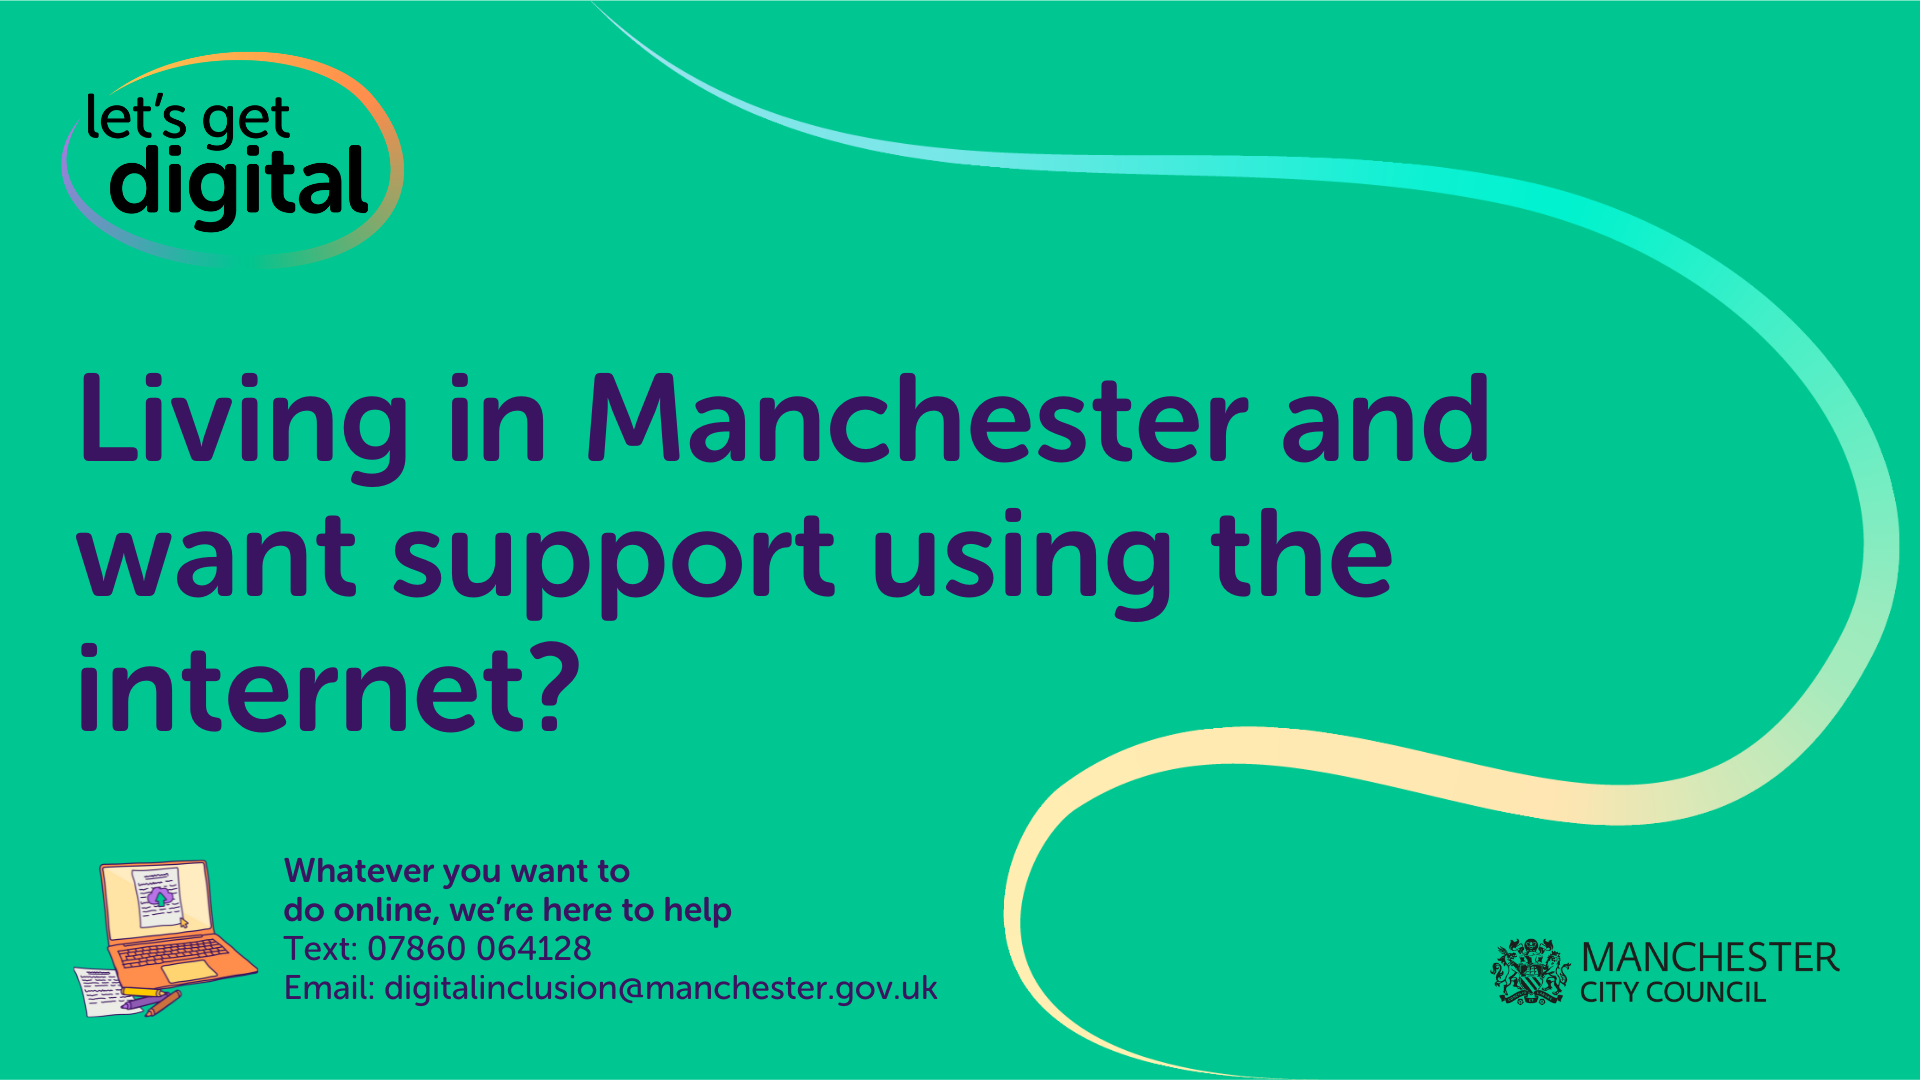 Get Online Week with Manchester City Council Manchester Local Care